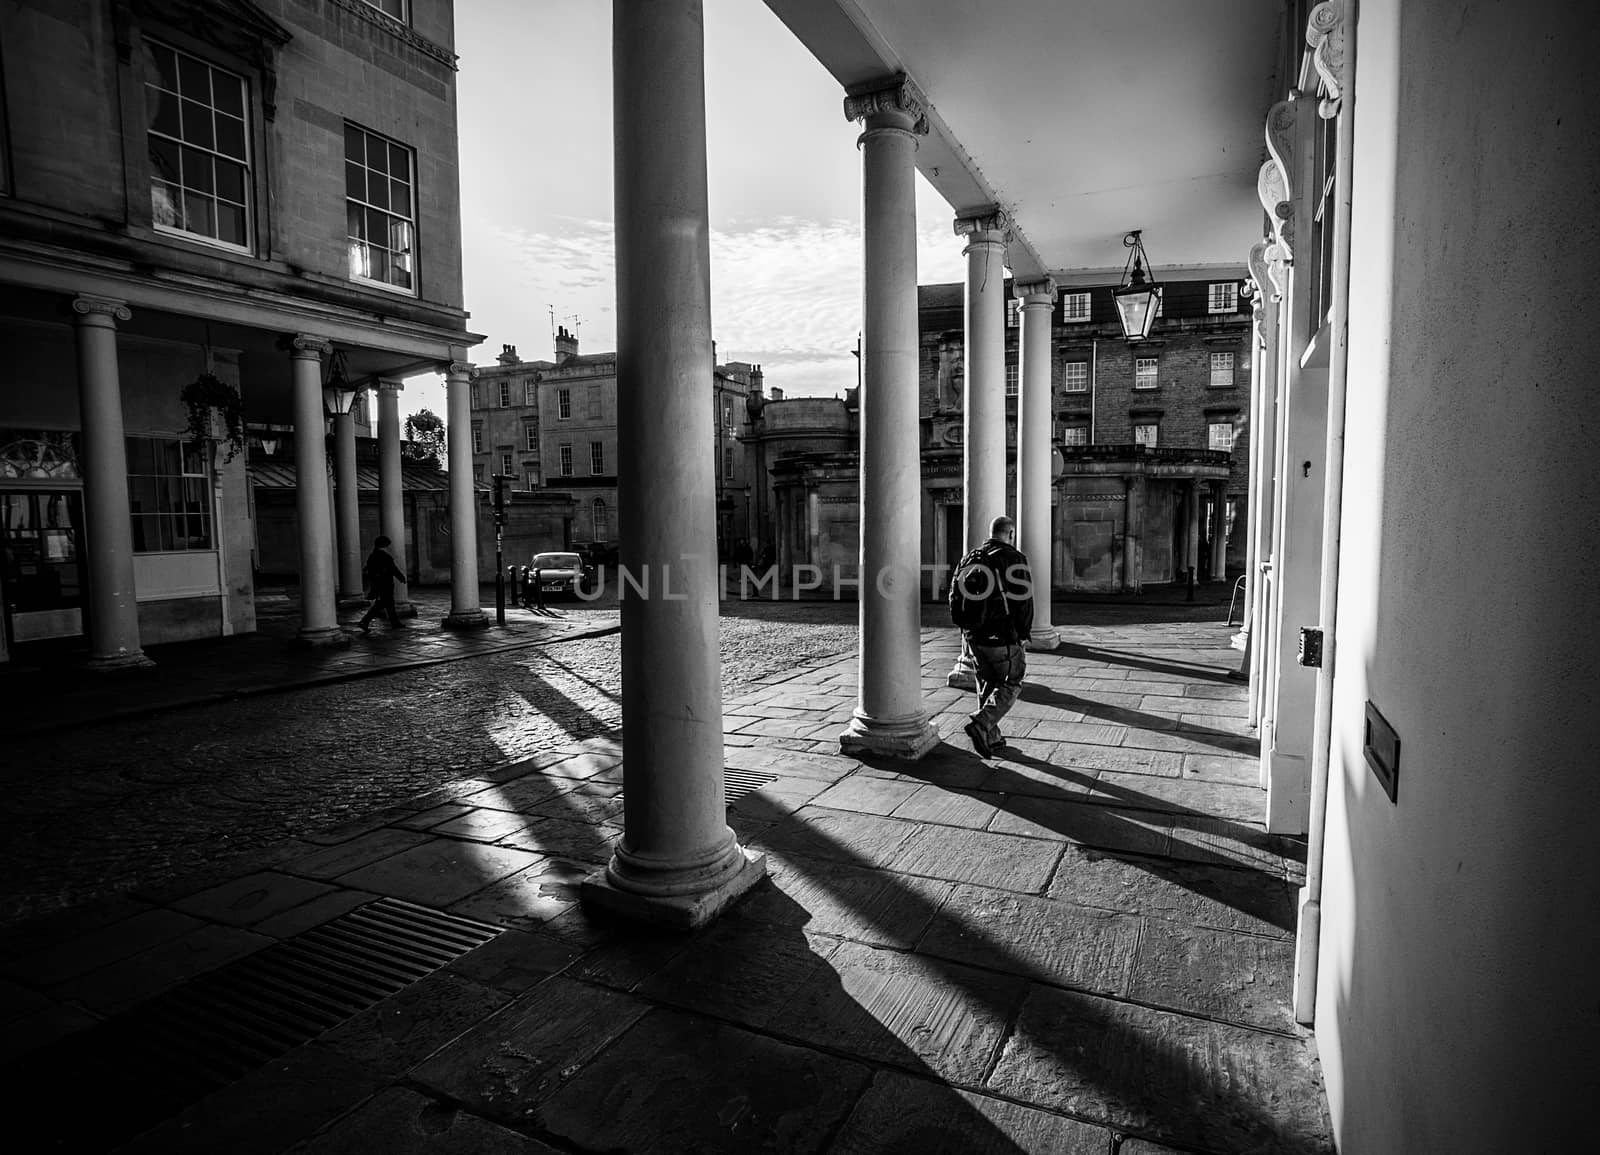 a lone figure in the shadow of pillars in bath england by sirspread